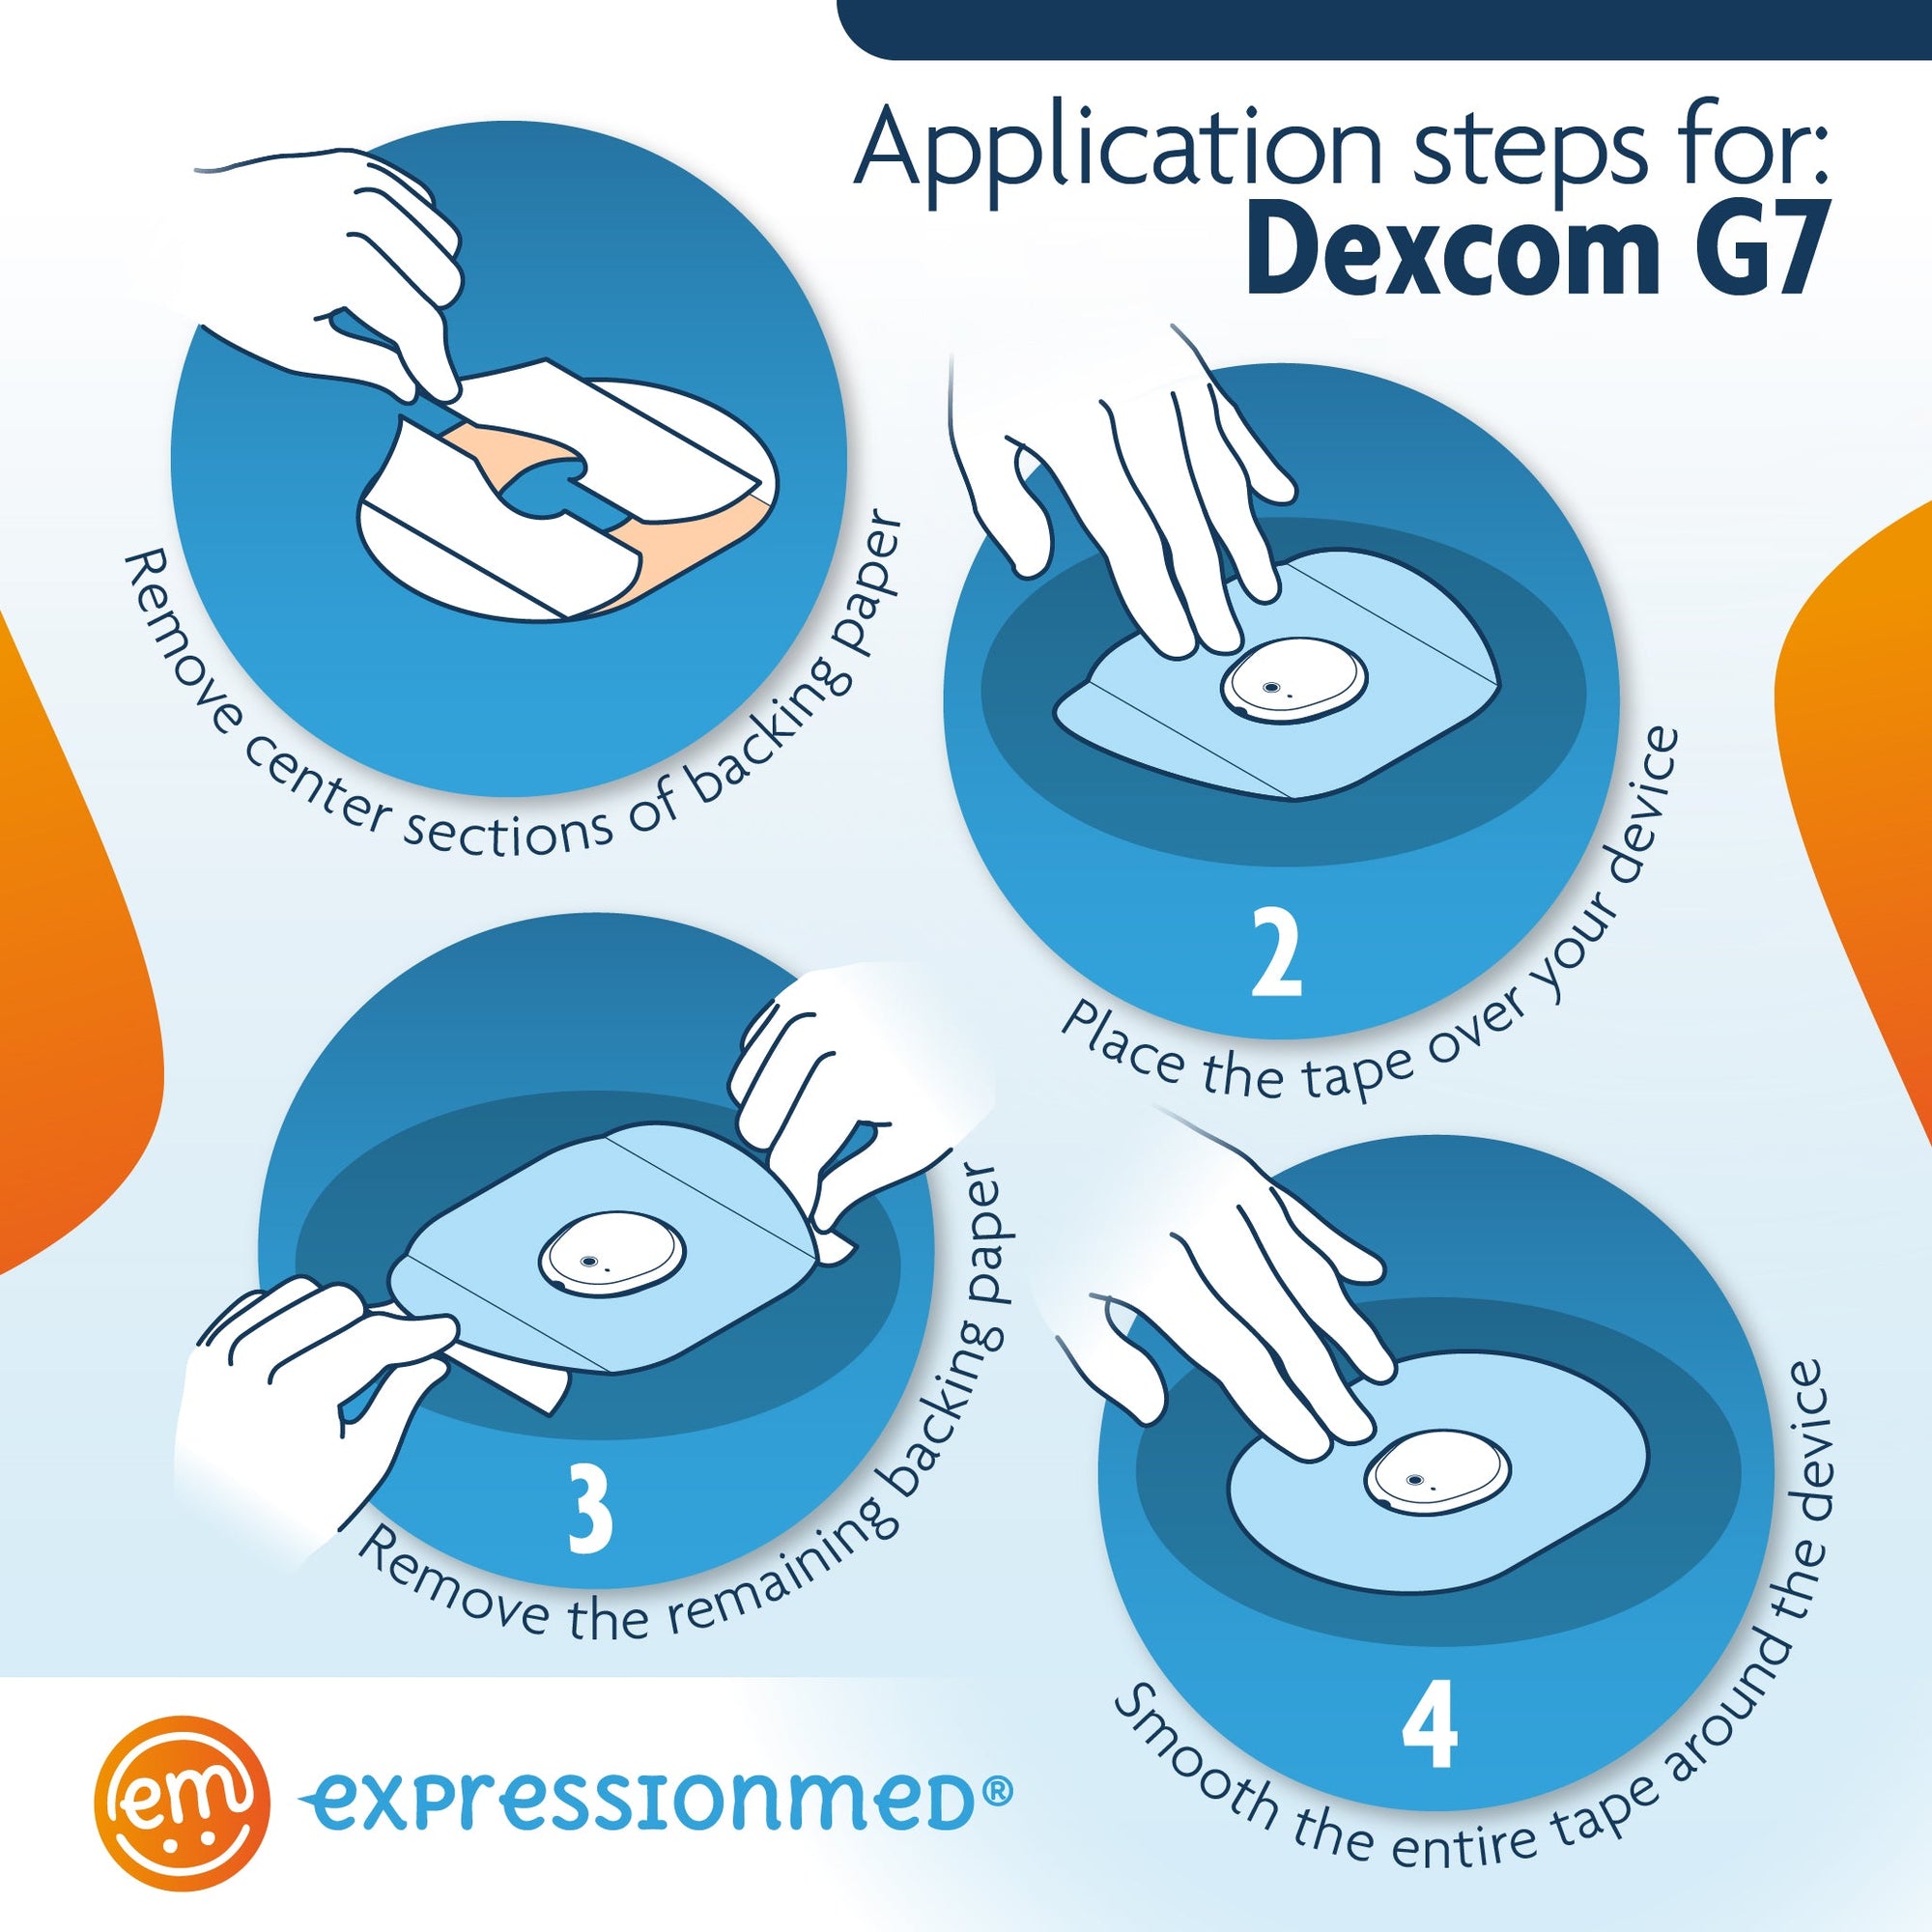 Application Instructions. 1. Prep skin with soap and water. 2. Remove Middle Sections and lay center hole over device. 3. Peel off both end sections and smooth down on skin. To remove, hold an edge and stretch material off skin., Dexcom Stelo Glucose Biosensor System